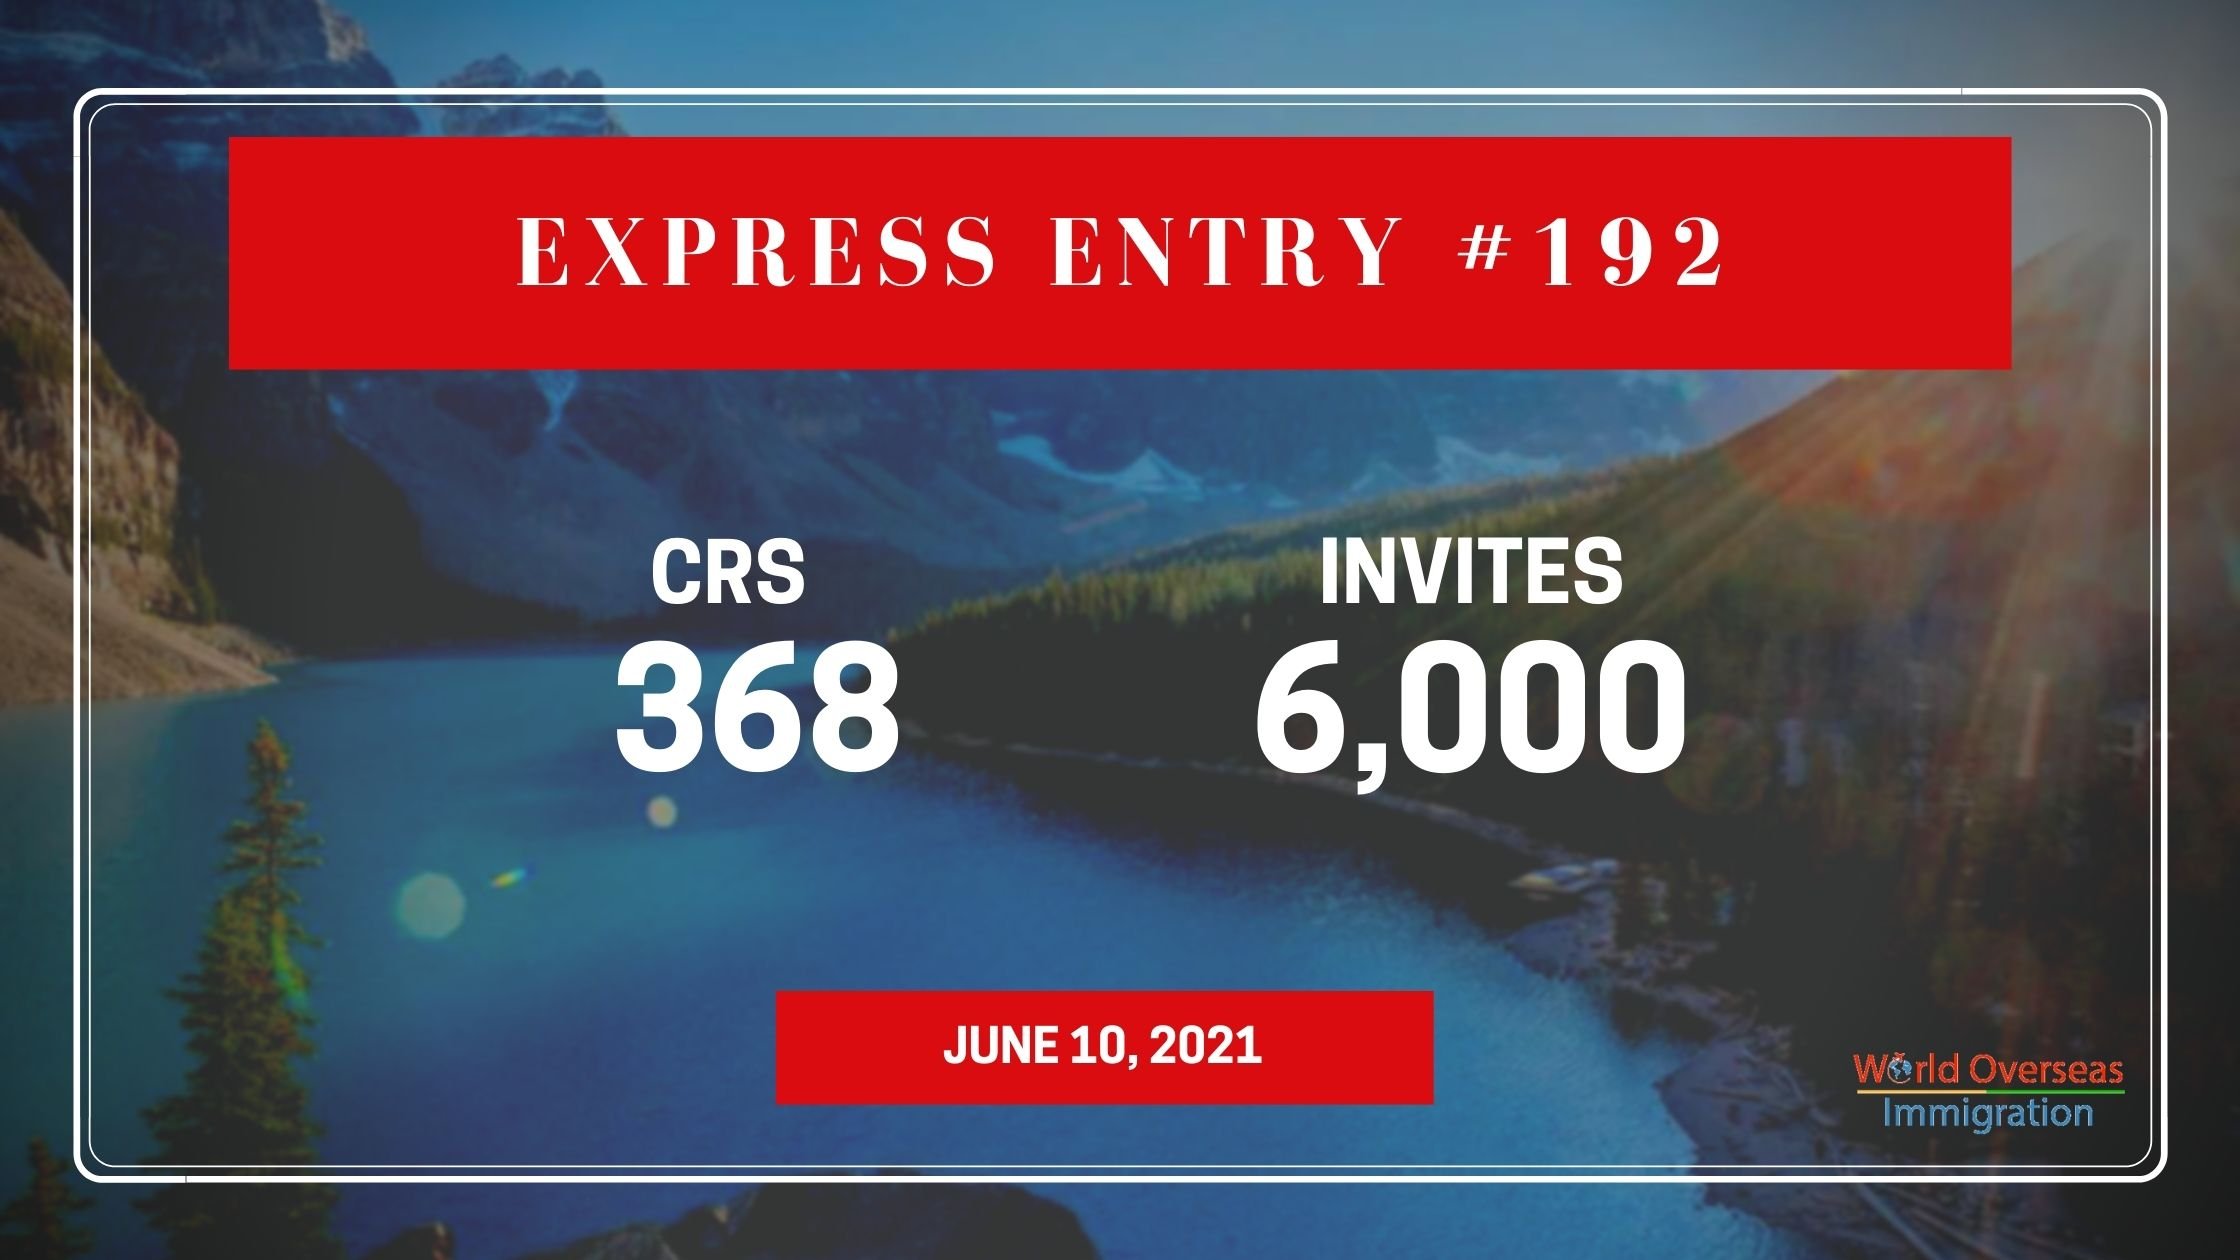 Express Entry #192: Canada invited 6,000  immigration candidates